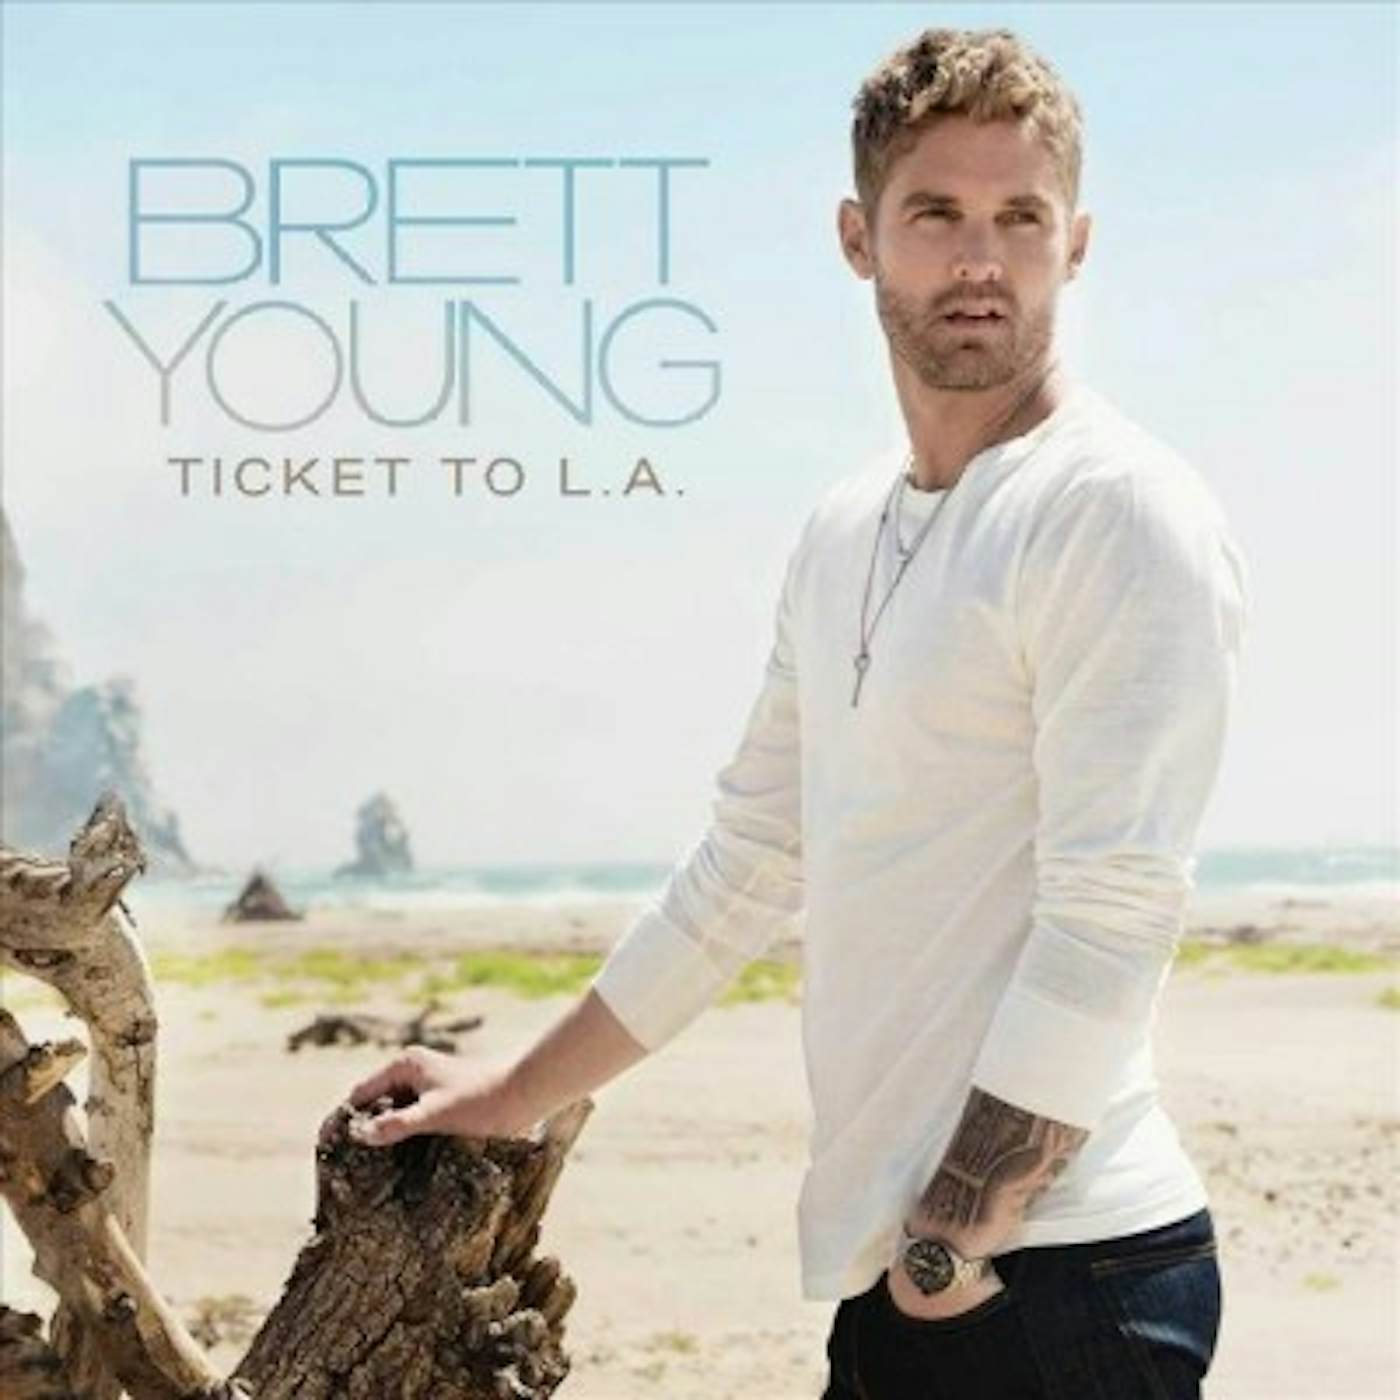 Brett Young TICKET TO L.A CD